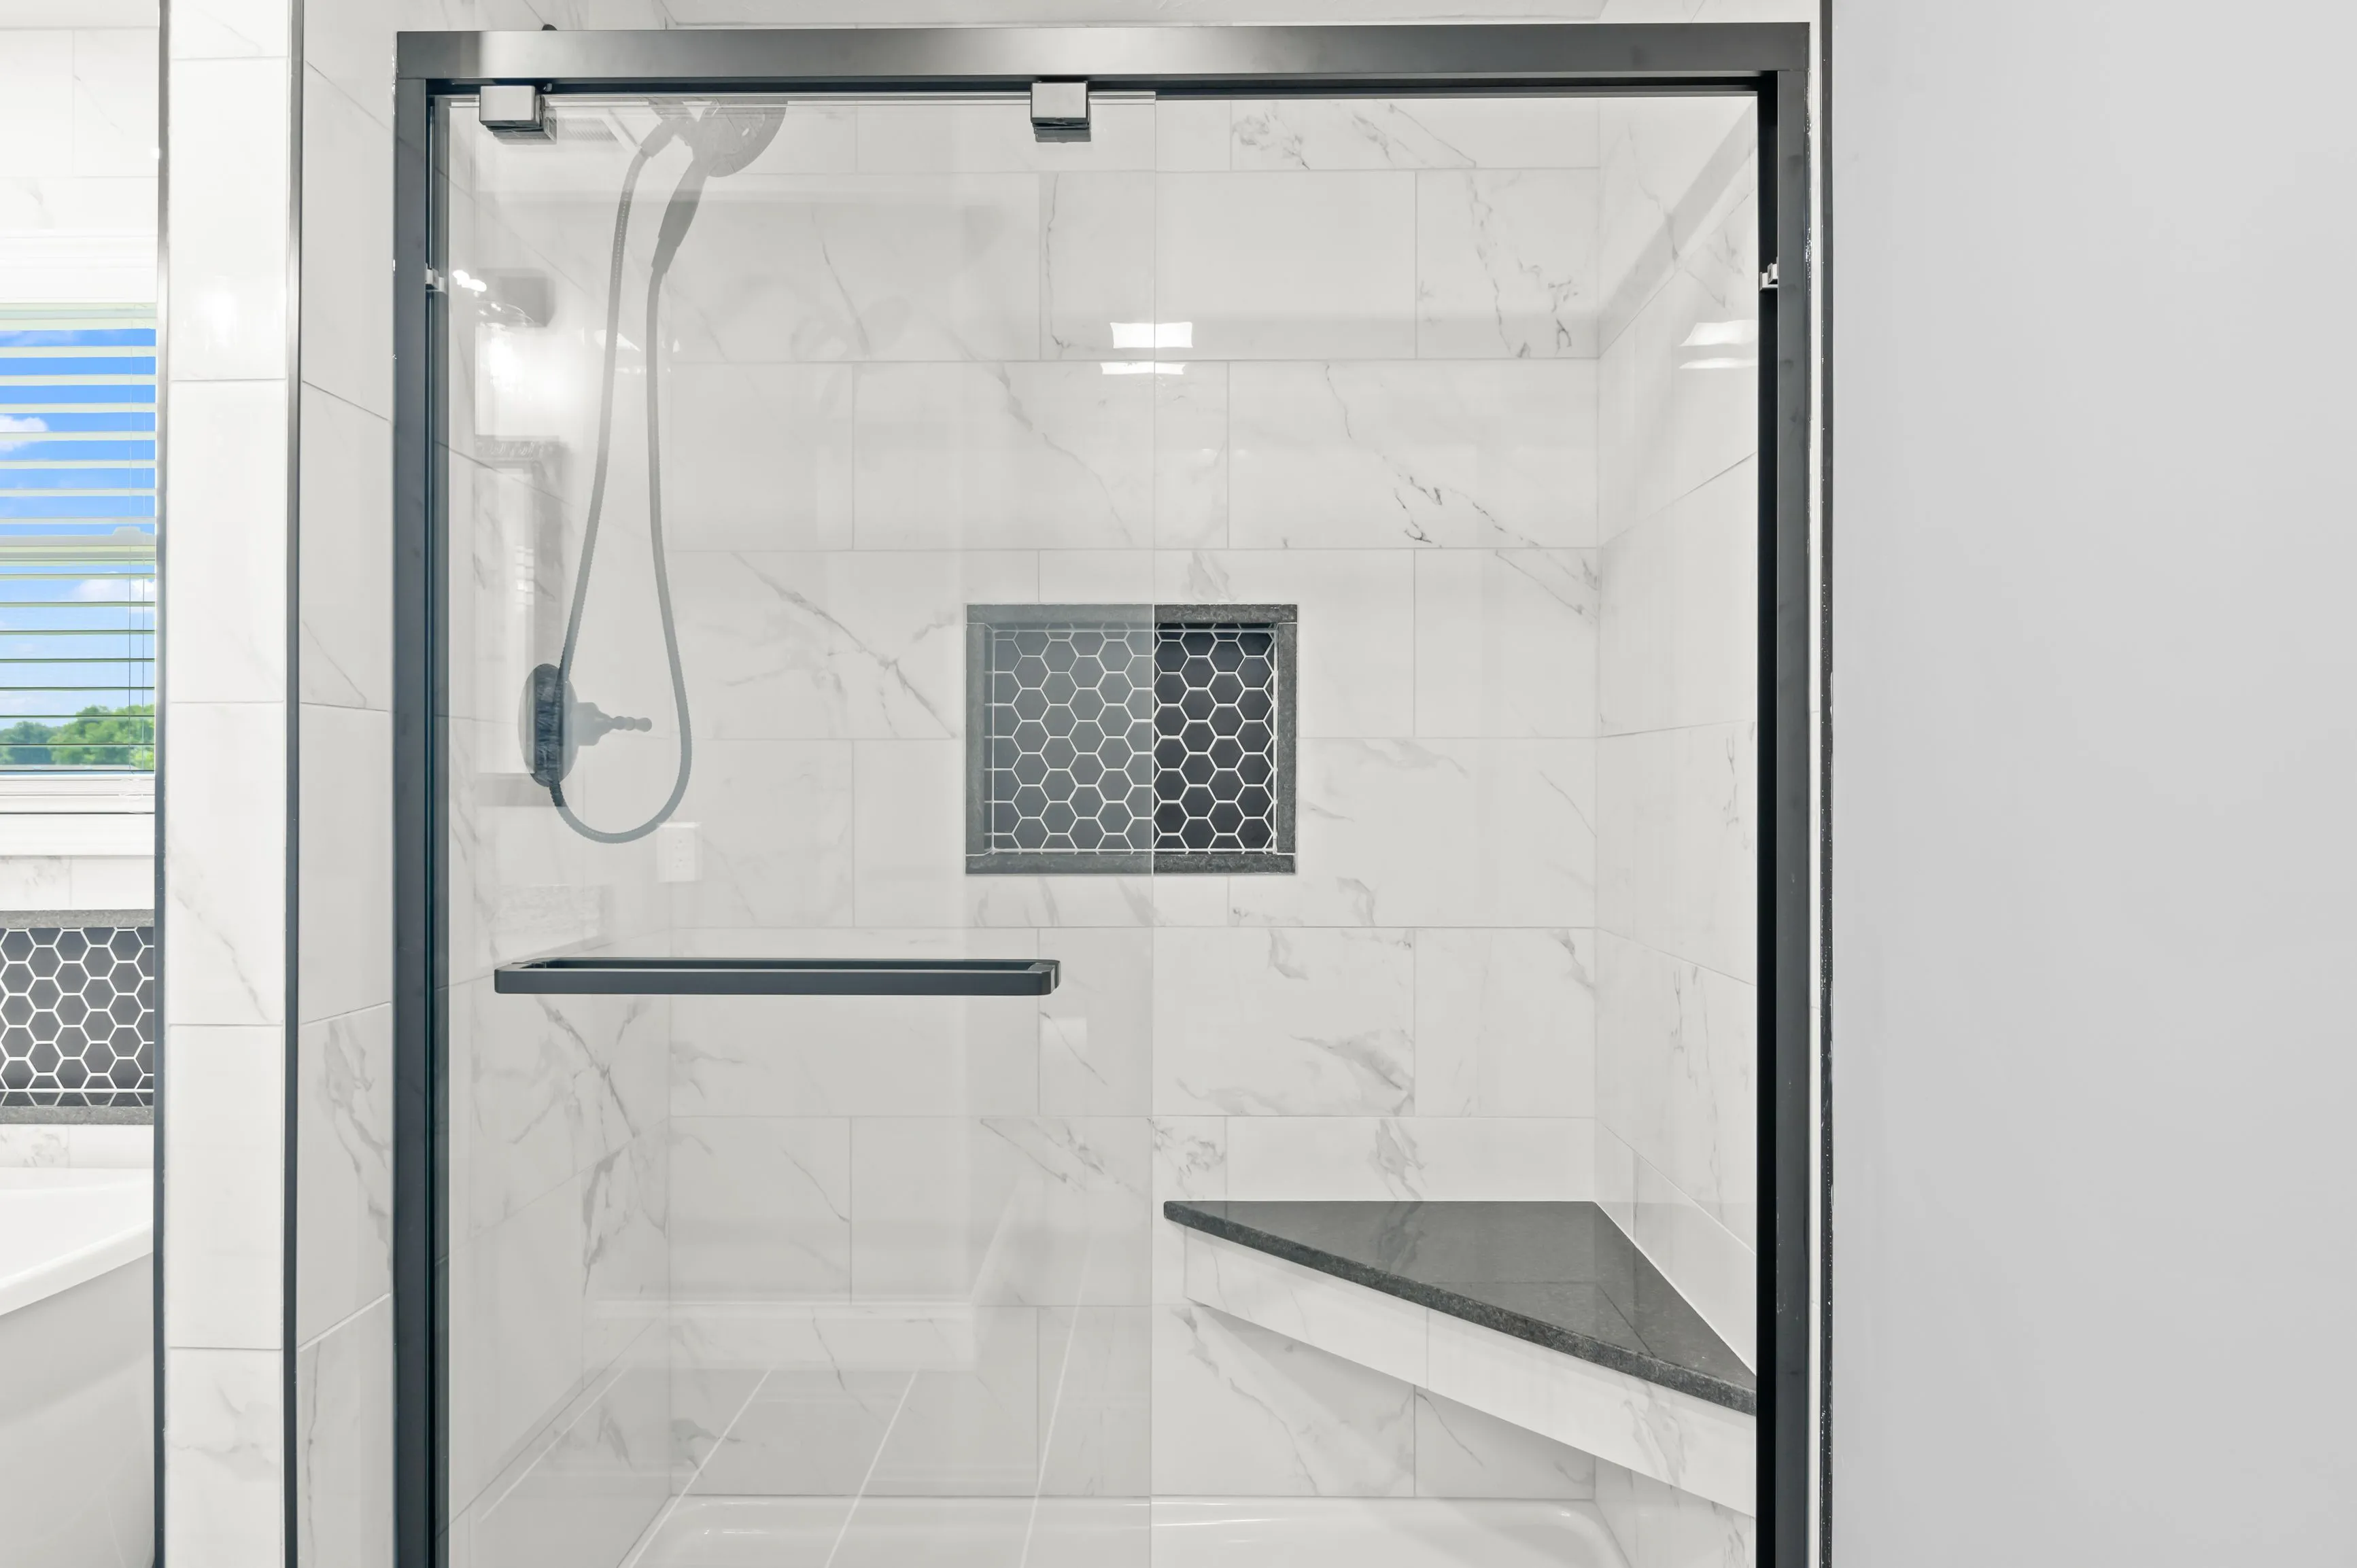 Modern bathroom with marble tiles featuring a glass door shower, built-in wall shelf, and a geometric design window.